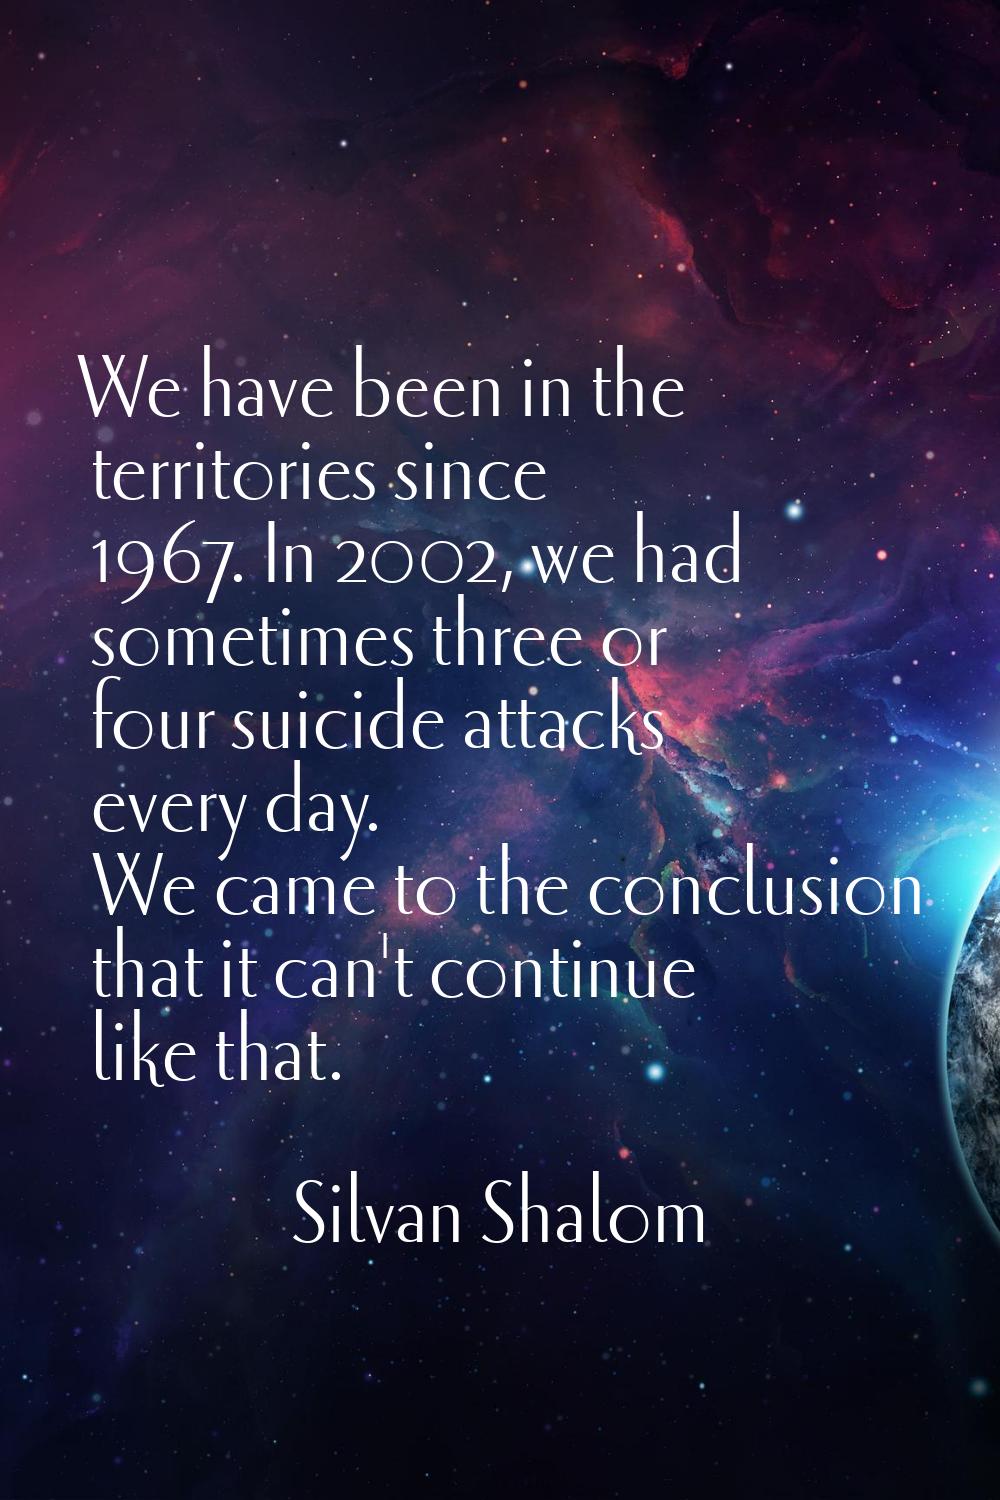 We have been in the territories since 1967. In 2002, we had sometimes three or four suicide attacks